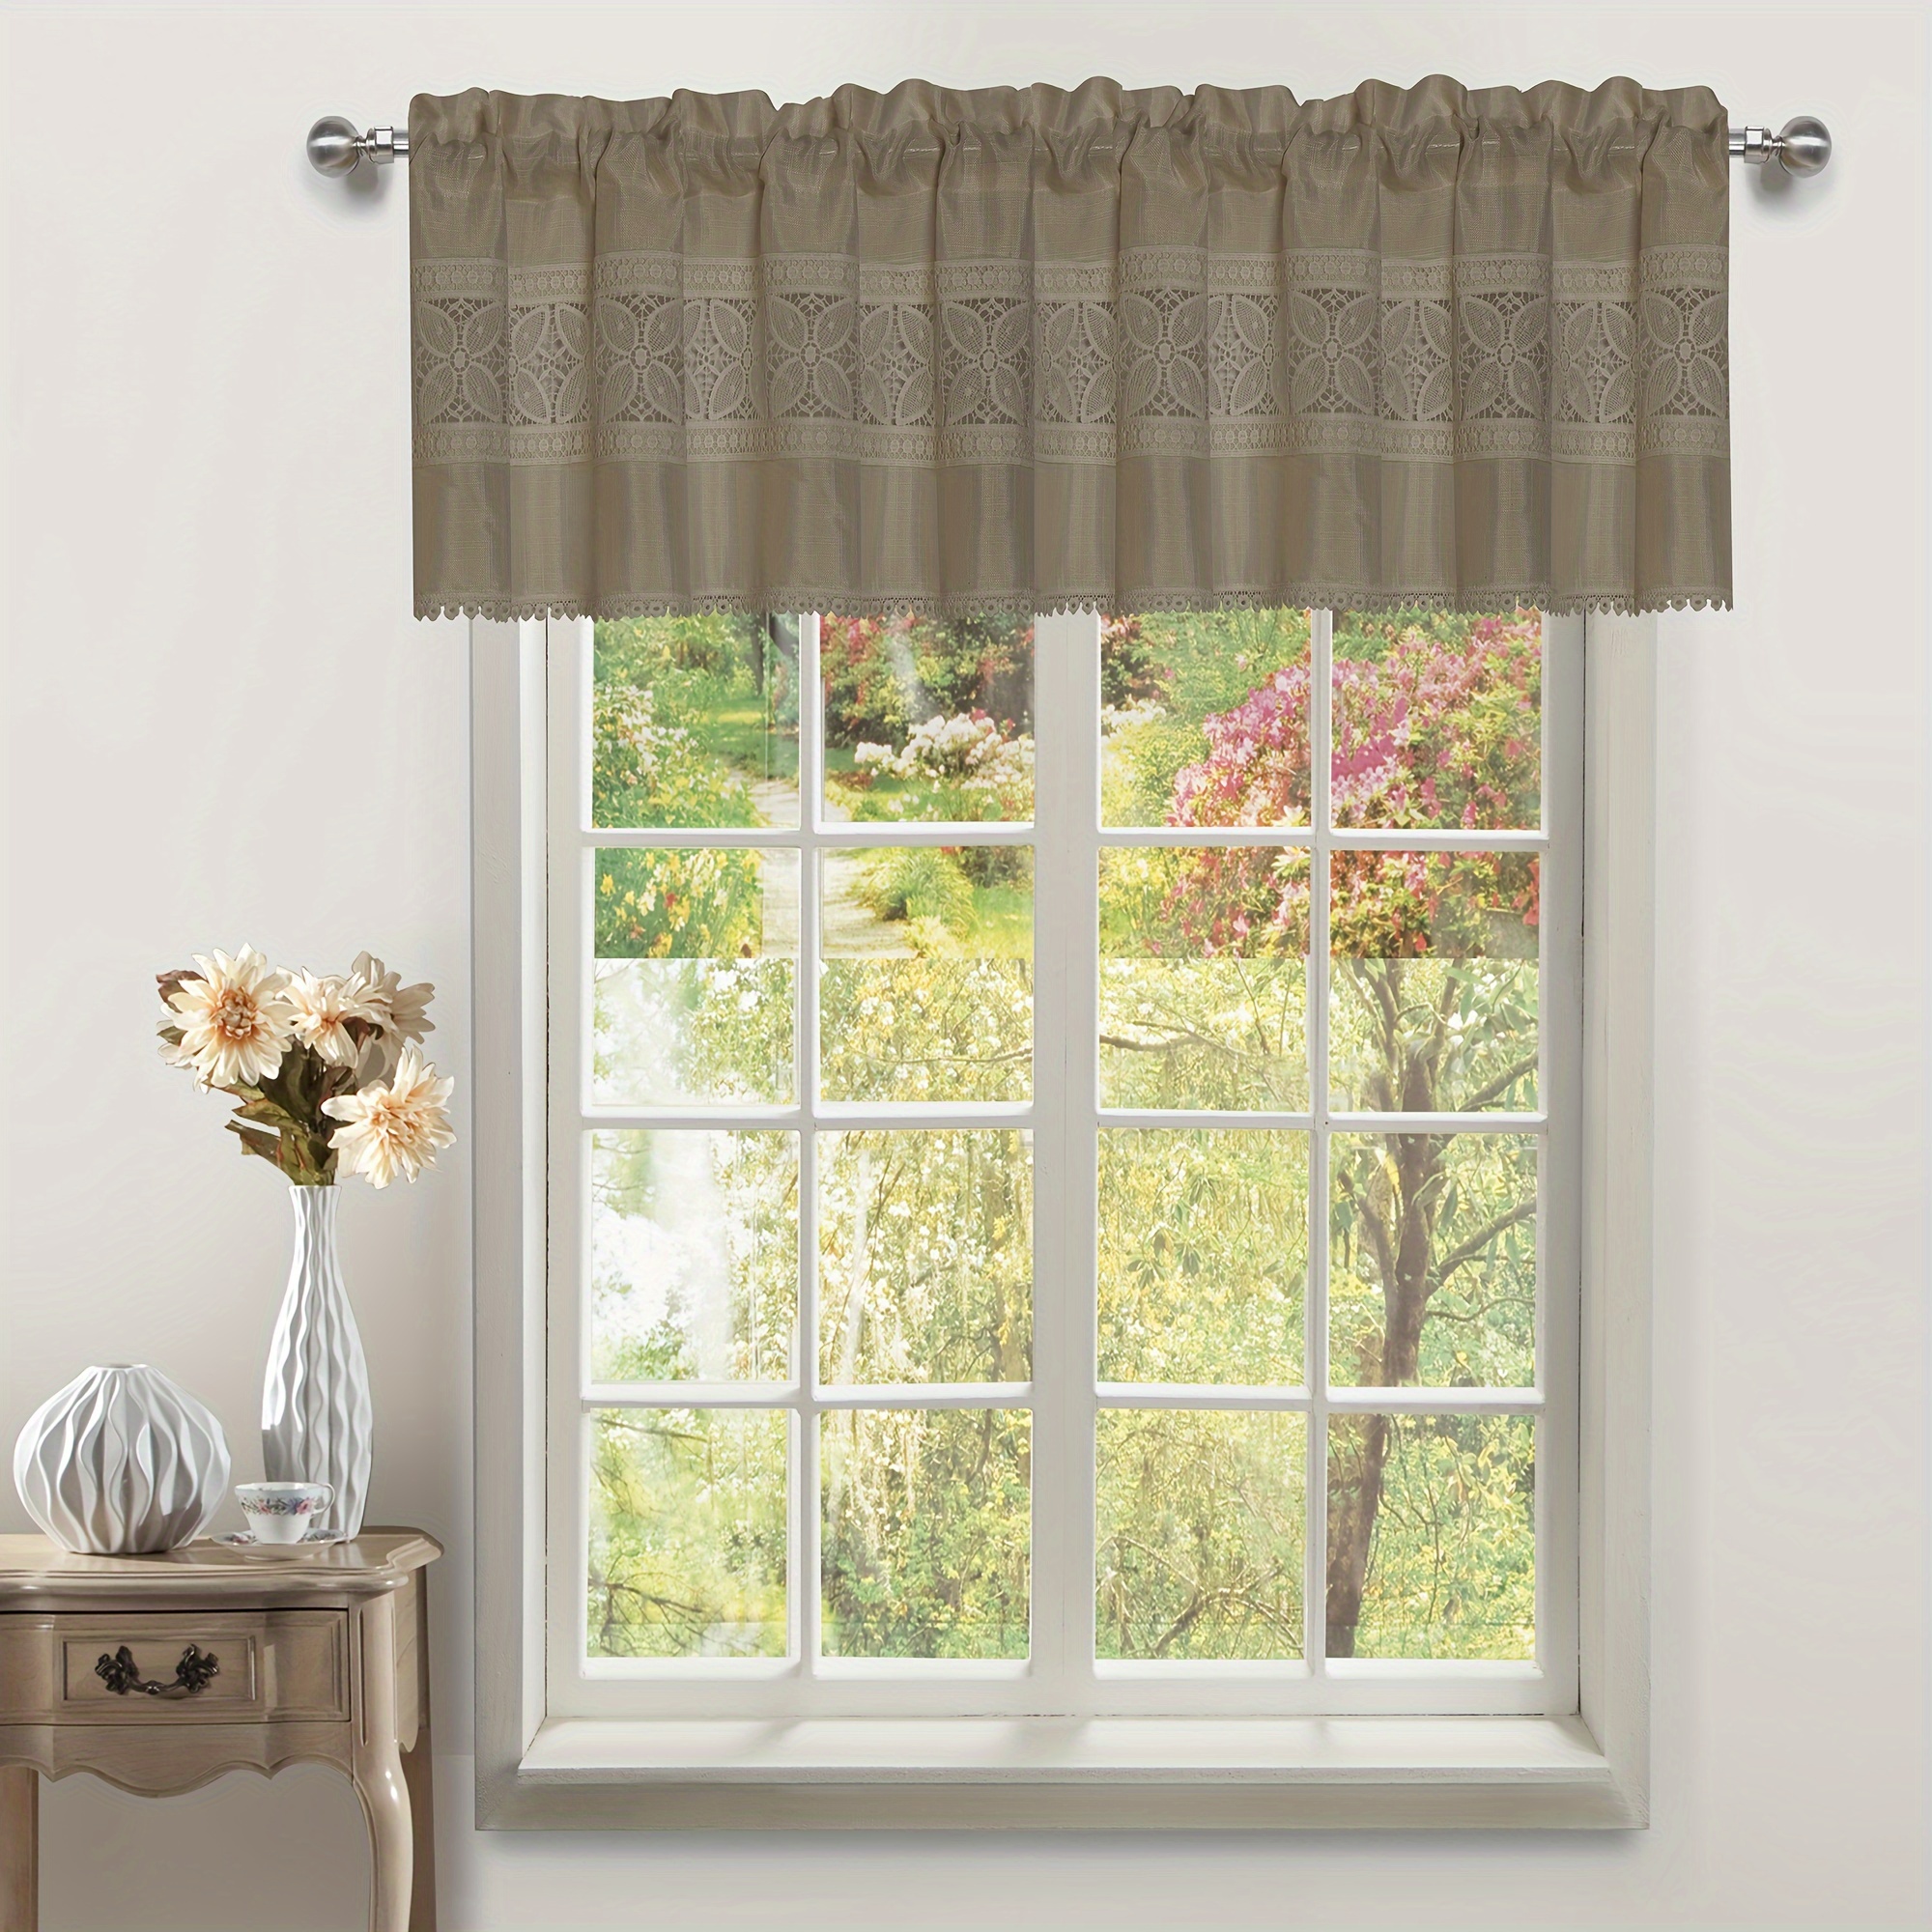 

Classic Valance - Polyester Imitation Hemp, Stitched Rod Pocket Curtain Top, Light-filtering, Washable For Home Decor - Fits Kitchen, Bedroom, Living & Dining Room